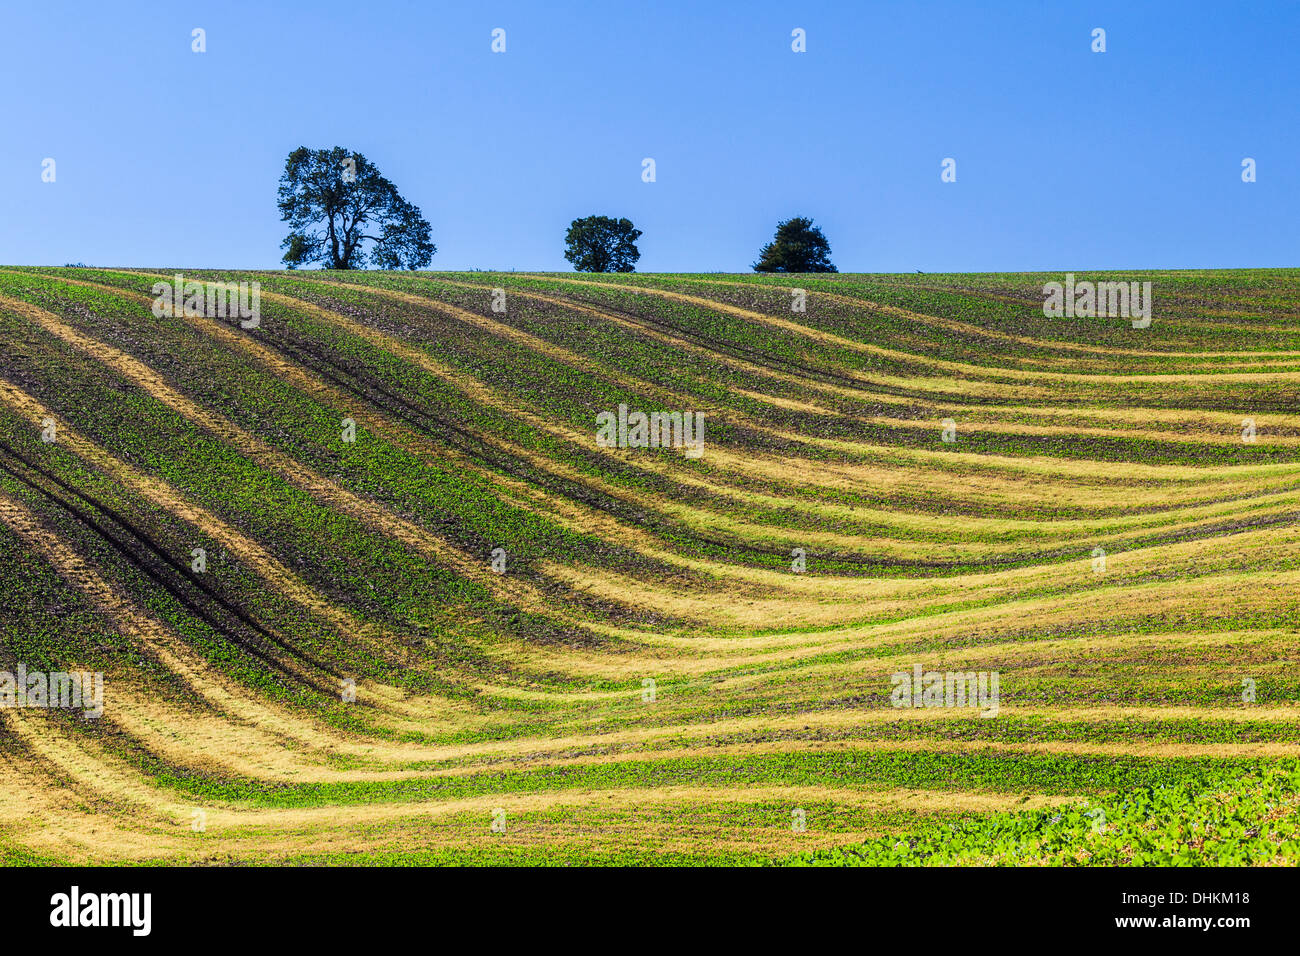 A simple image of undulating patterns created by young crops and furrows in a ploughed field in Wiltshire, UK. Stock Photo